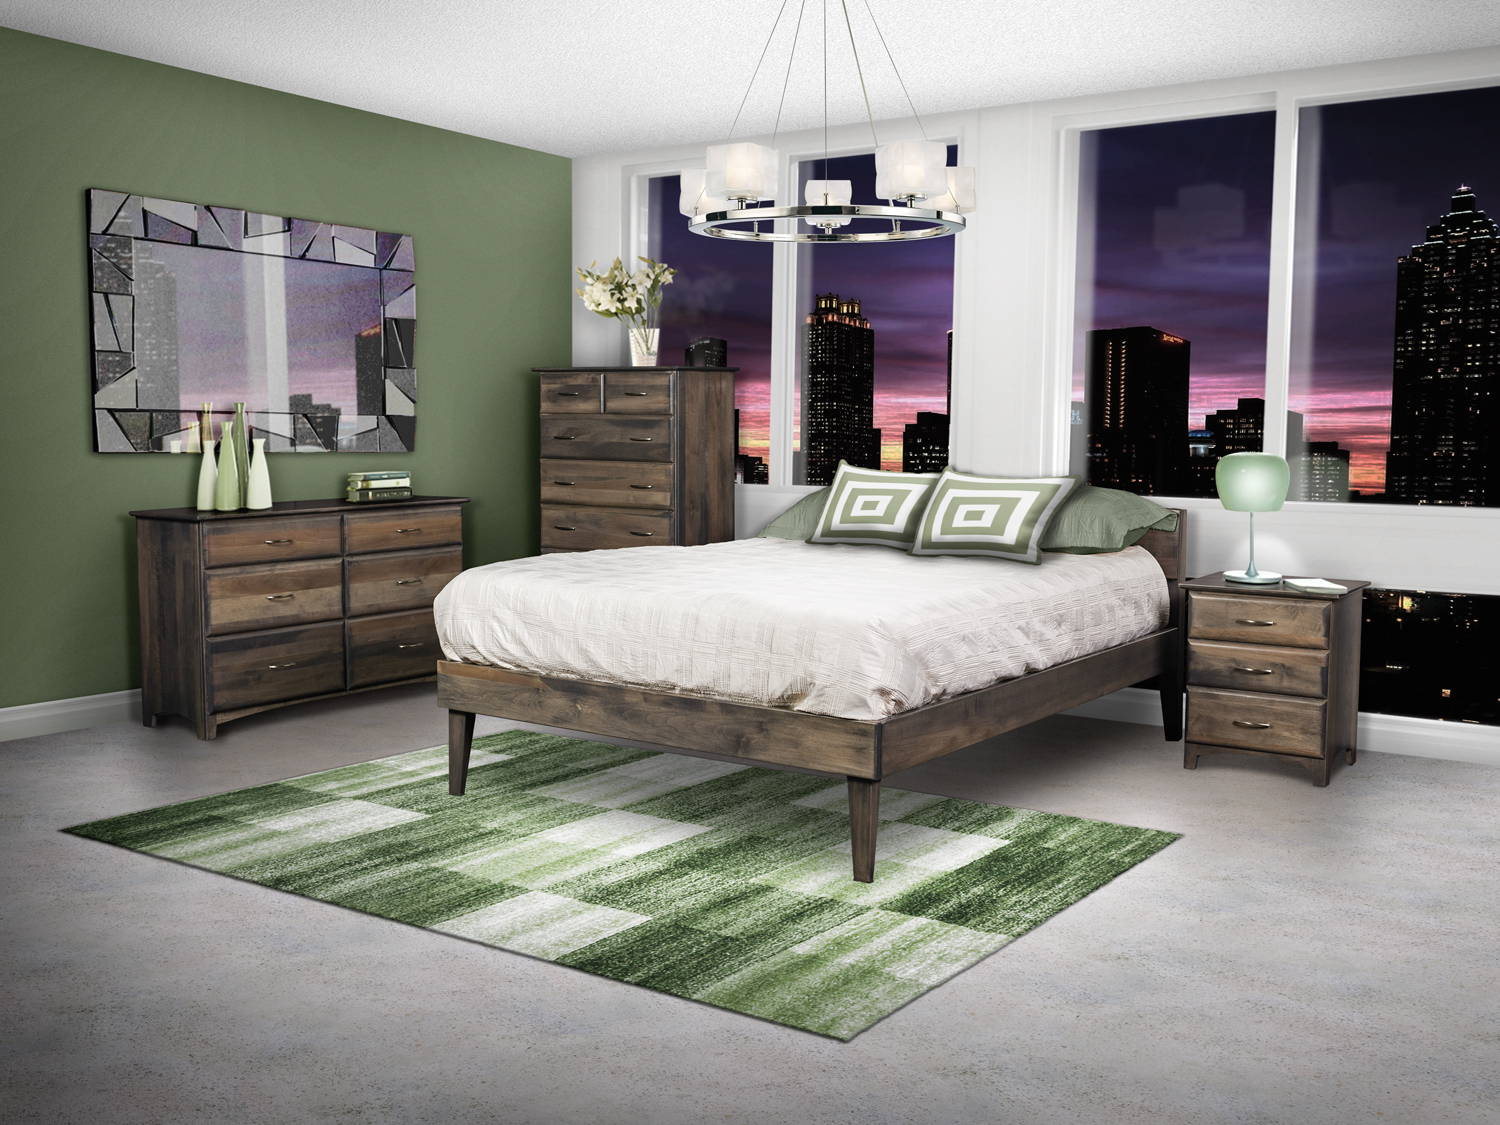 Image of fully customizable Madison Avenue Bedroom Set through Harvest Home Interiors Amish Solid Wood Furniture